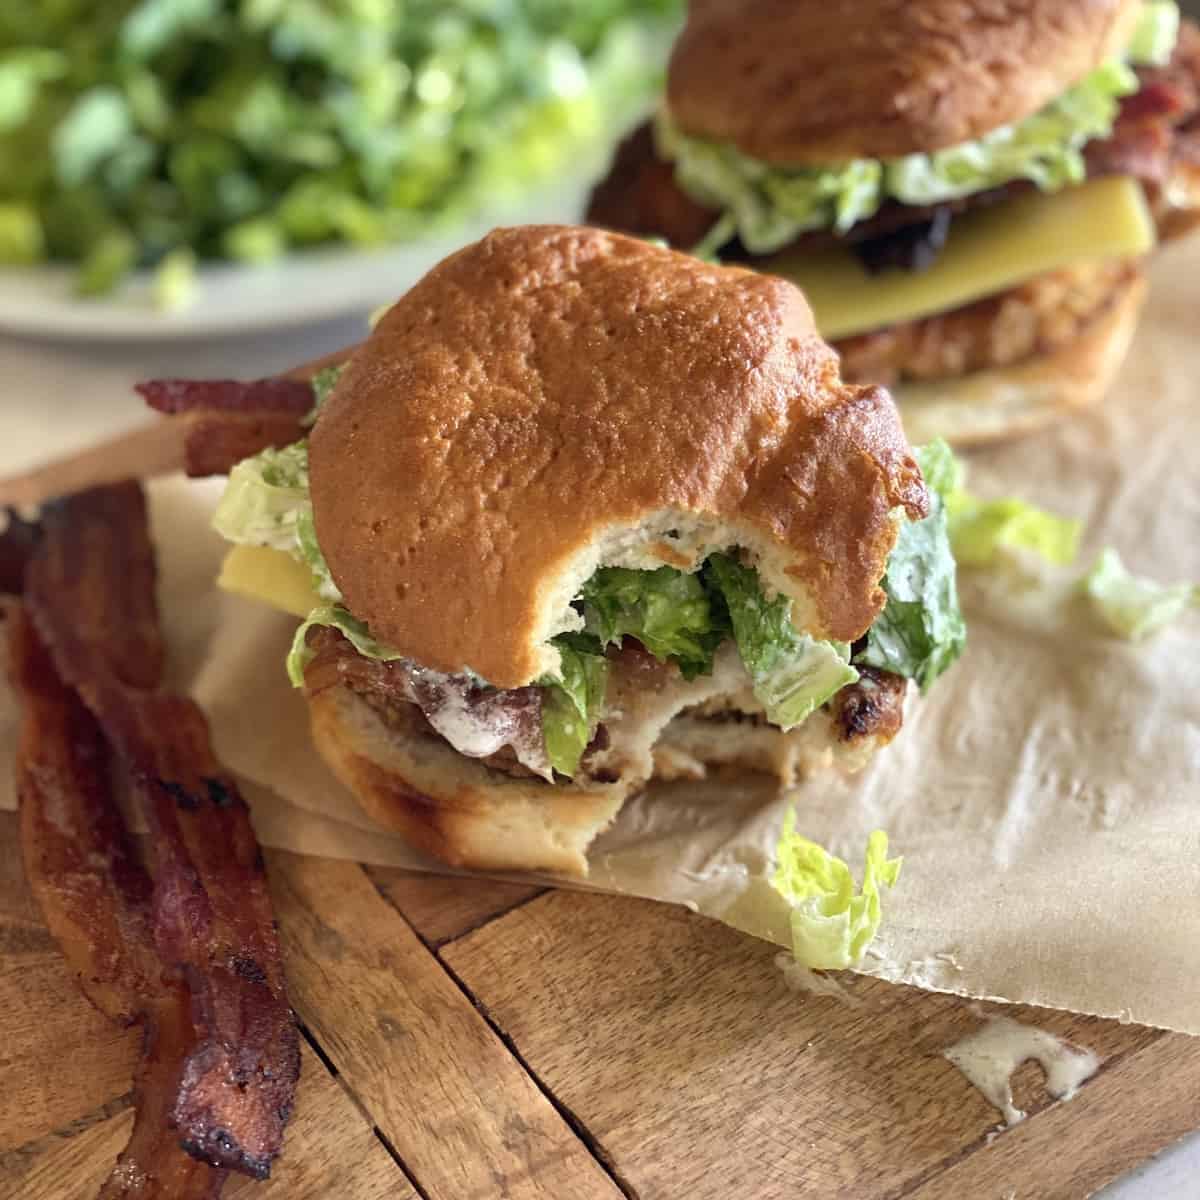 A burger bite with fried bacon on the side on a wooden board with a piece of parchment paper.